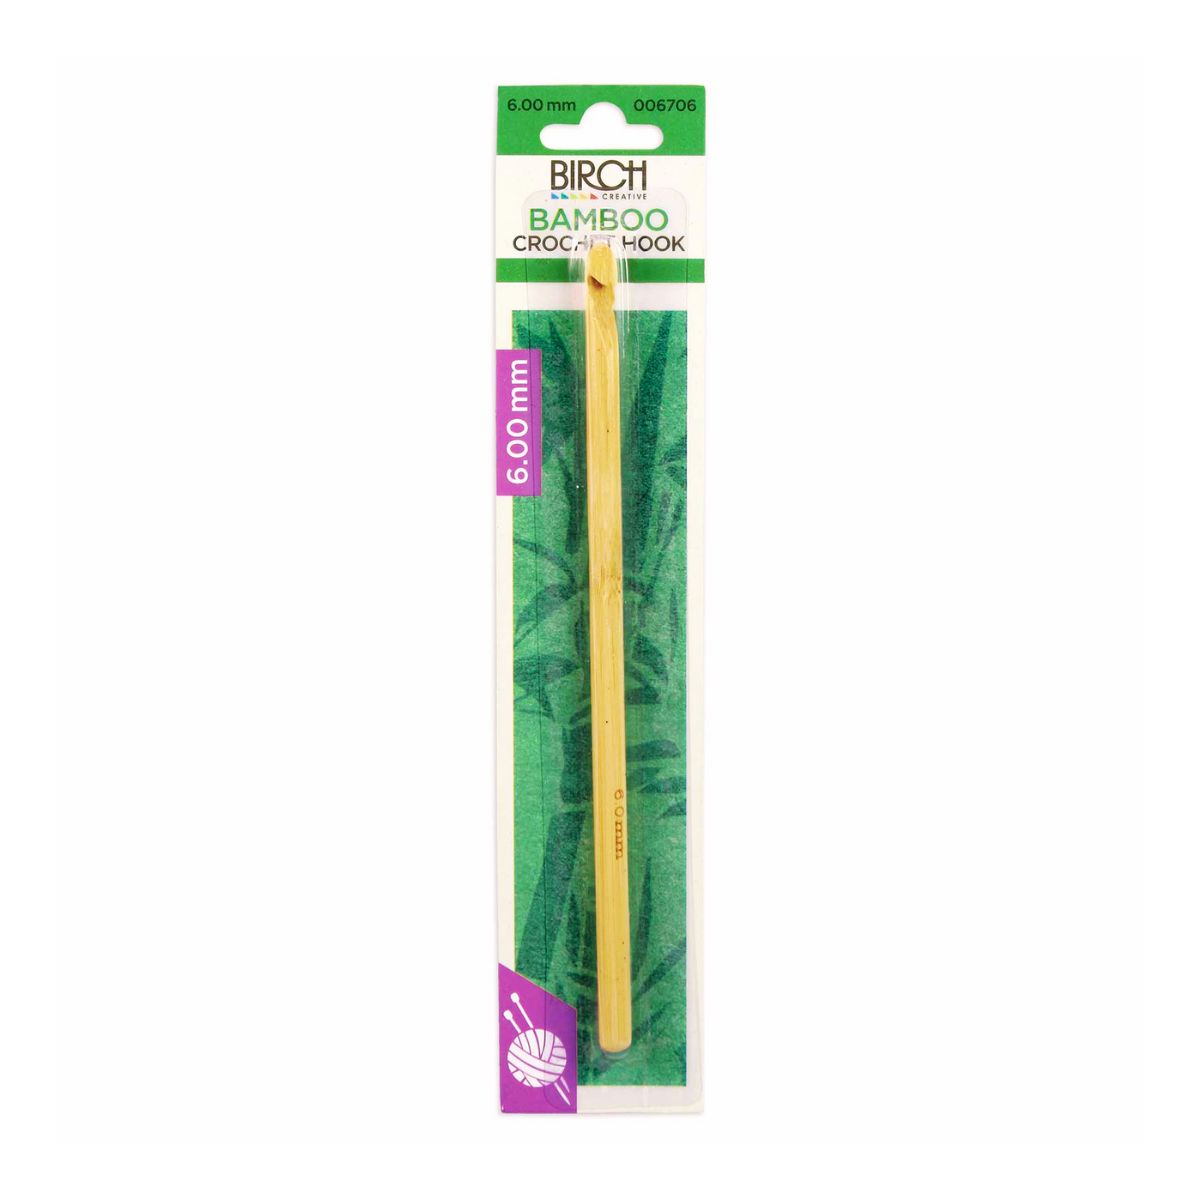 Birch Bamboo Wooden Crochet Hook With Round Handle - Assorted Sizes